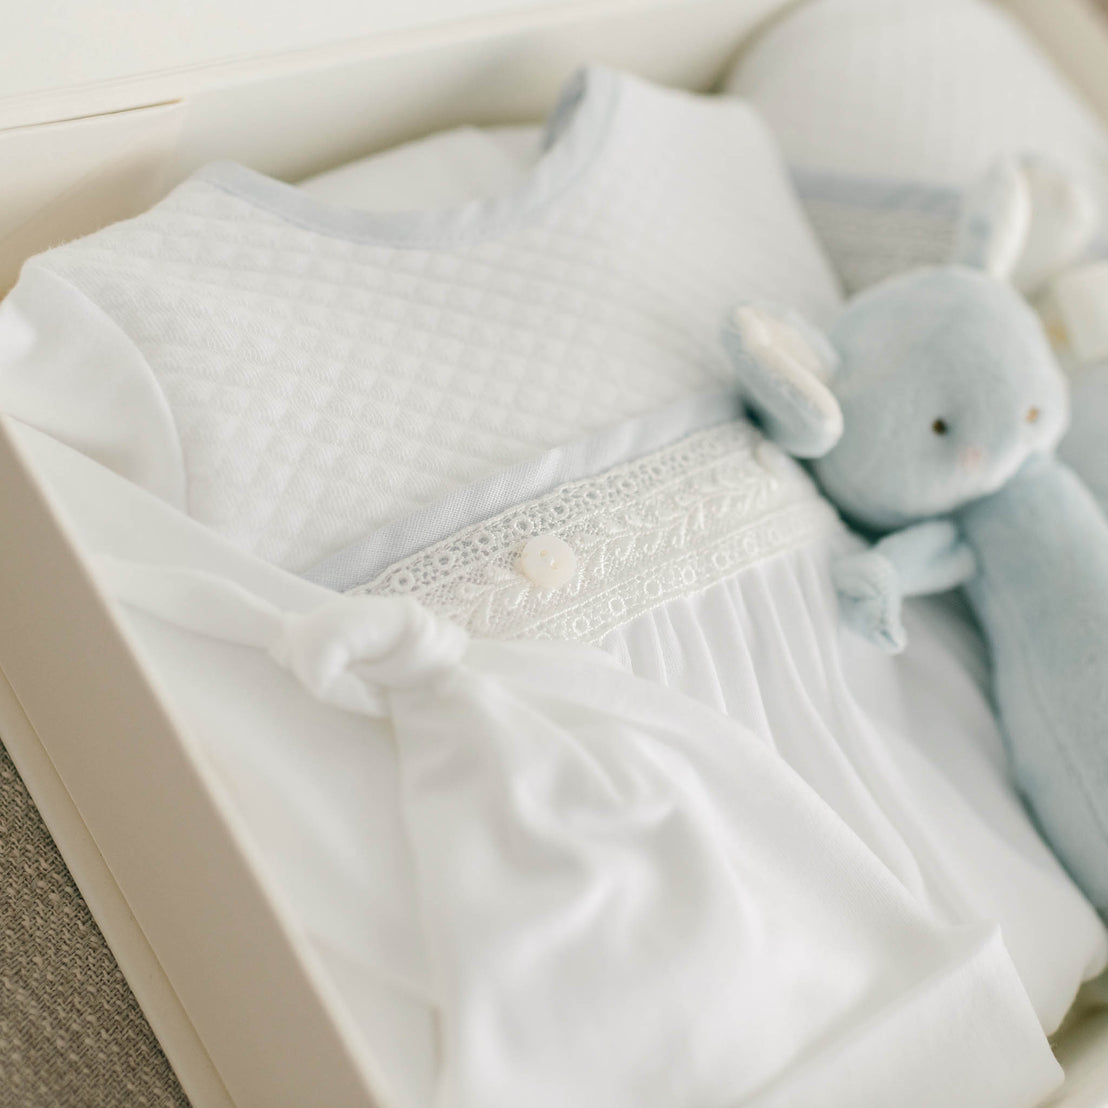 Side view of the Harrison Newborn Gift Set, which includes the Layette Gown, Bonnet (or Knot Cap), Rattle, Blanket, and Gift Box